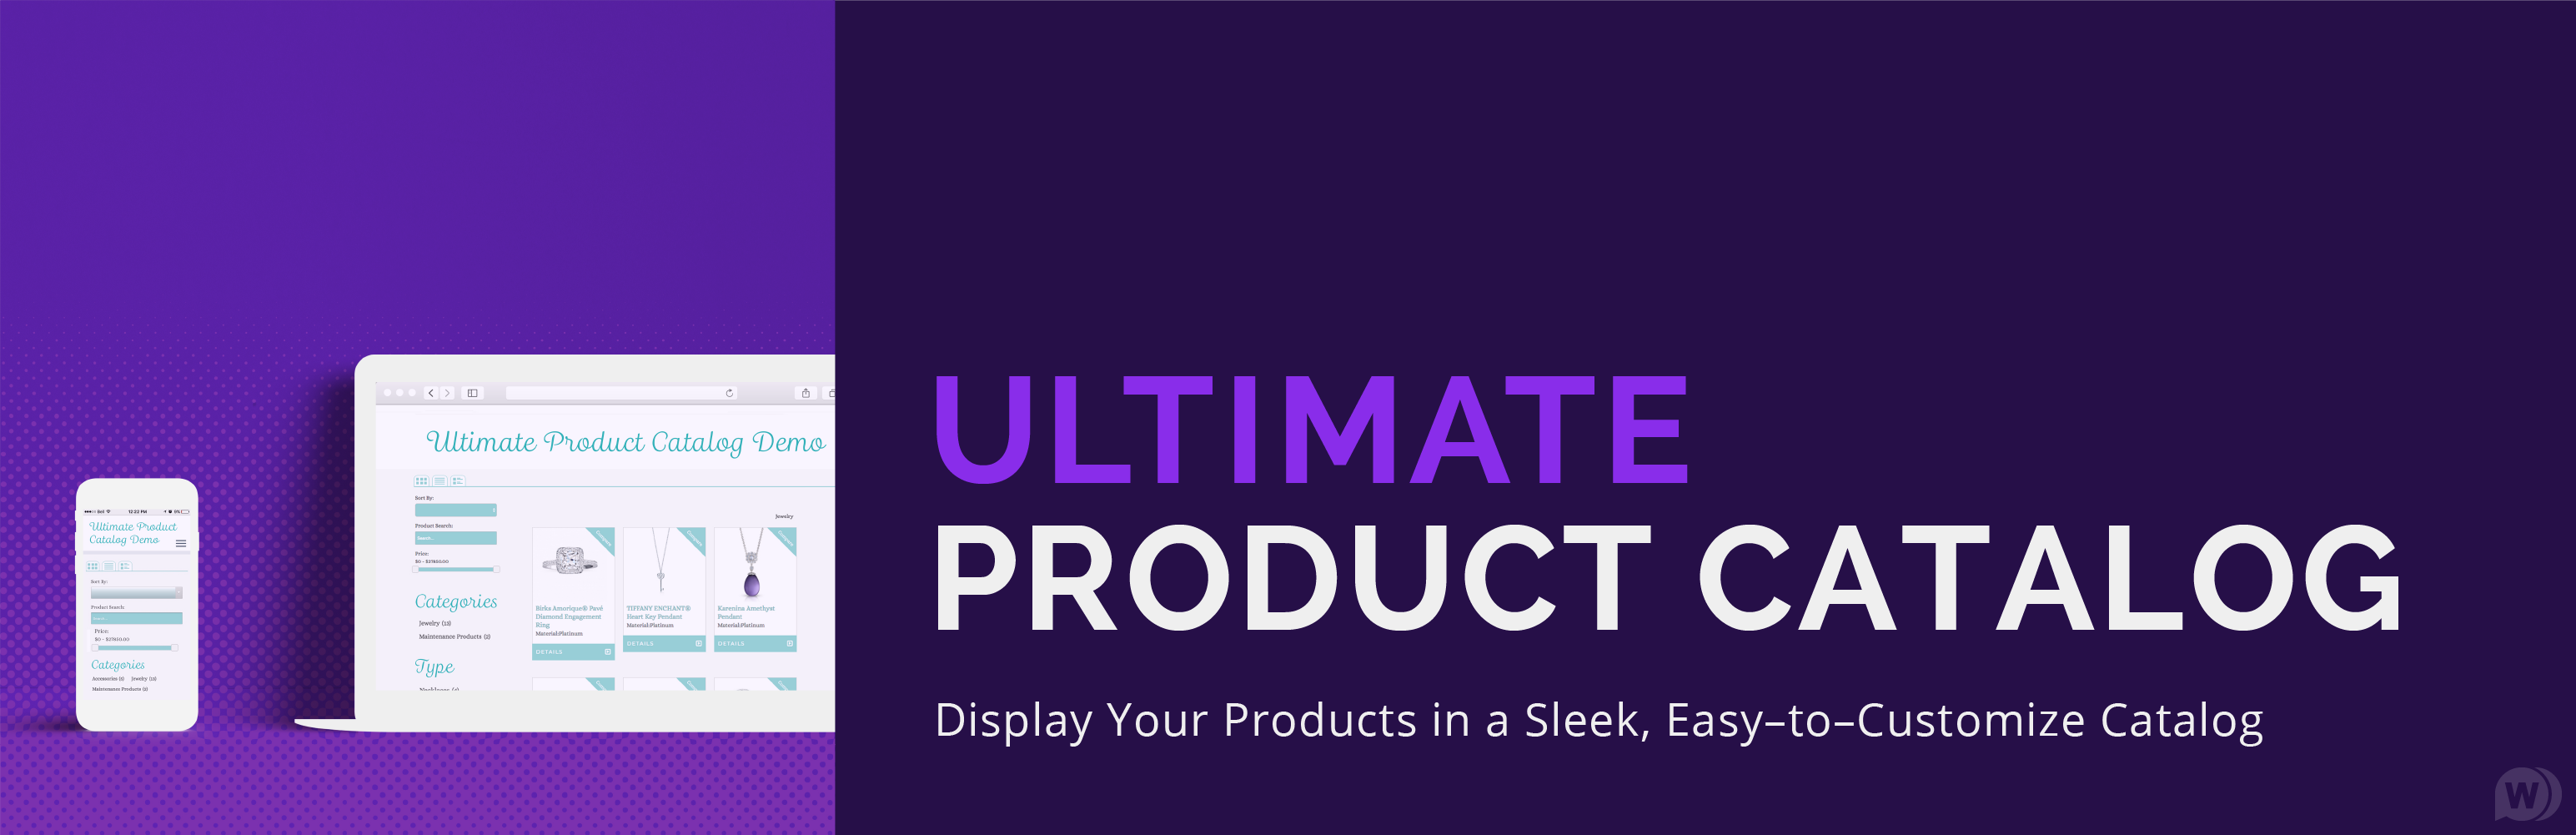 1555741541_ultimate-product-catalog.png